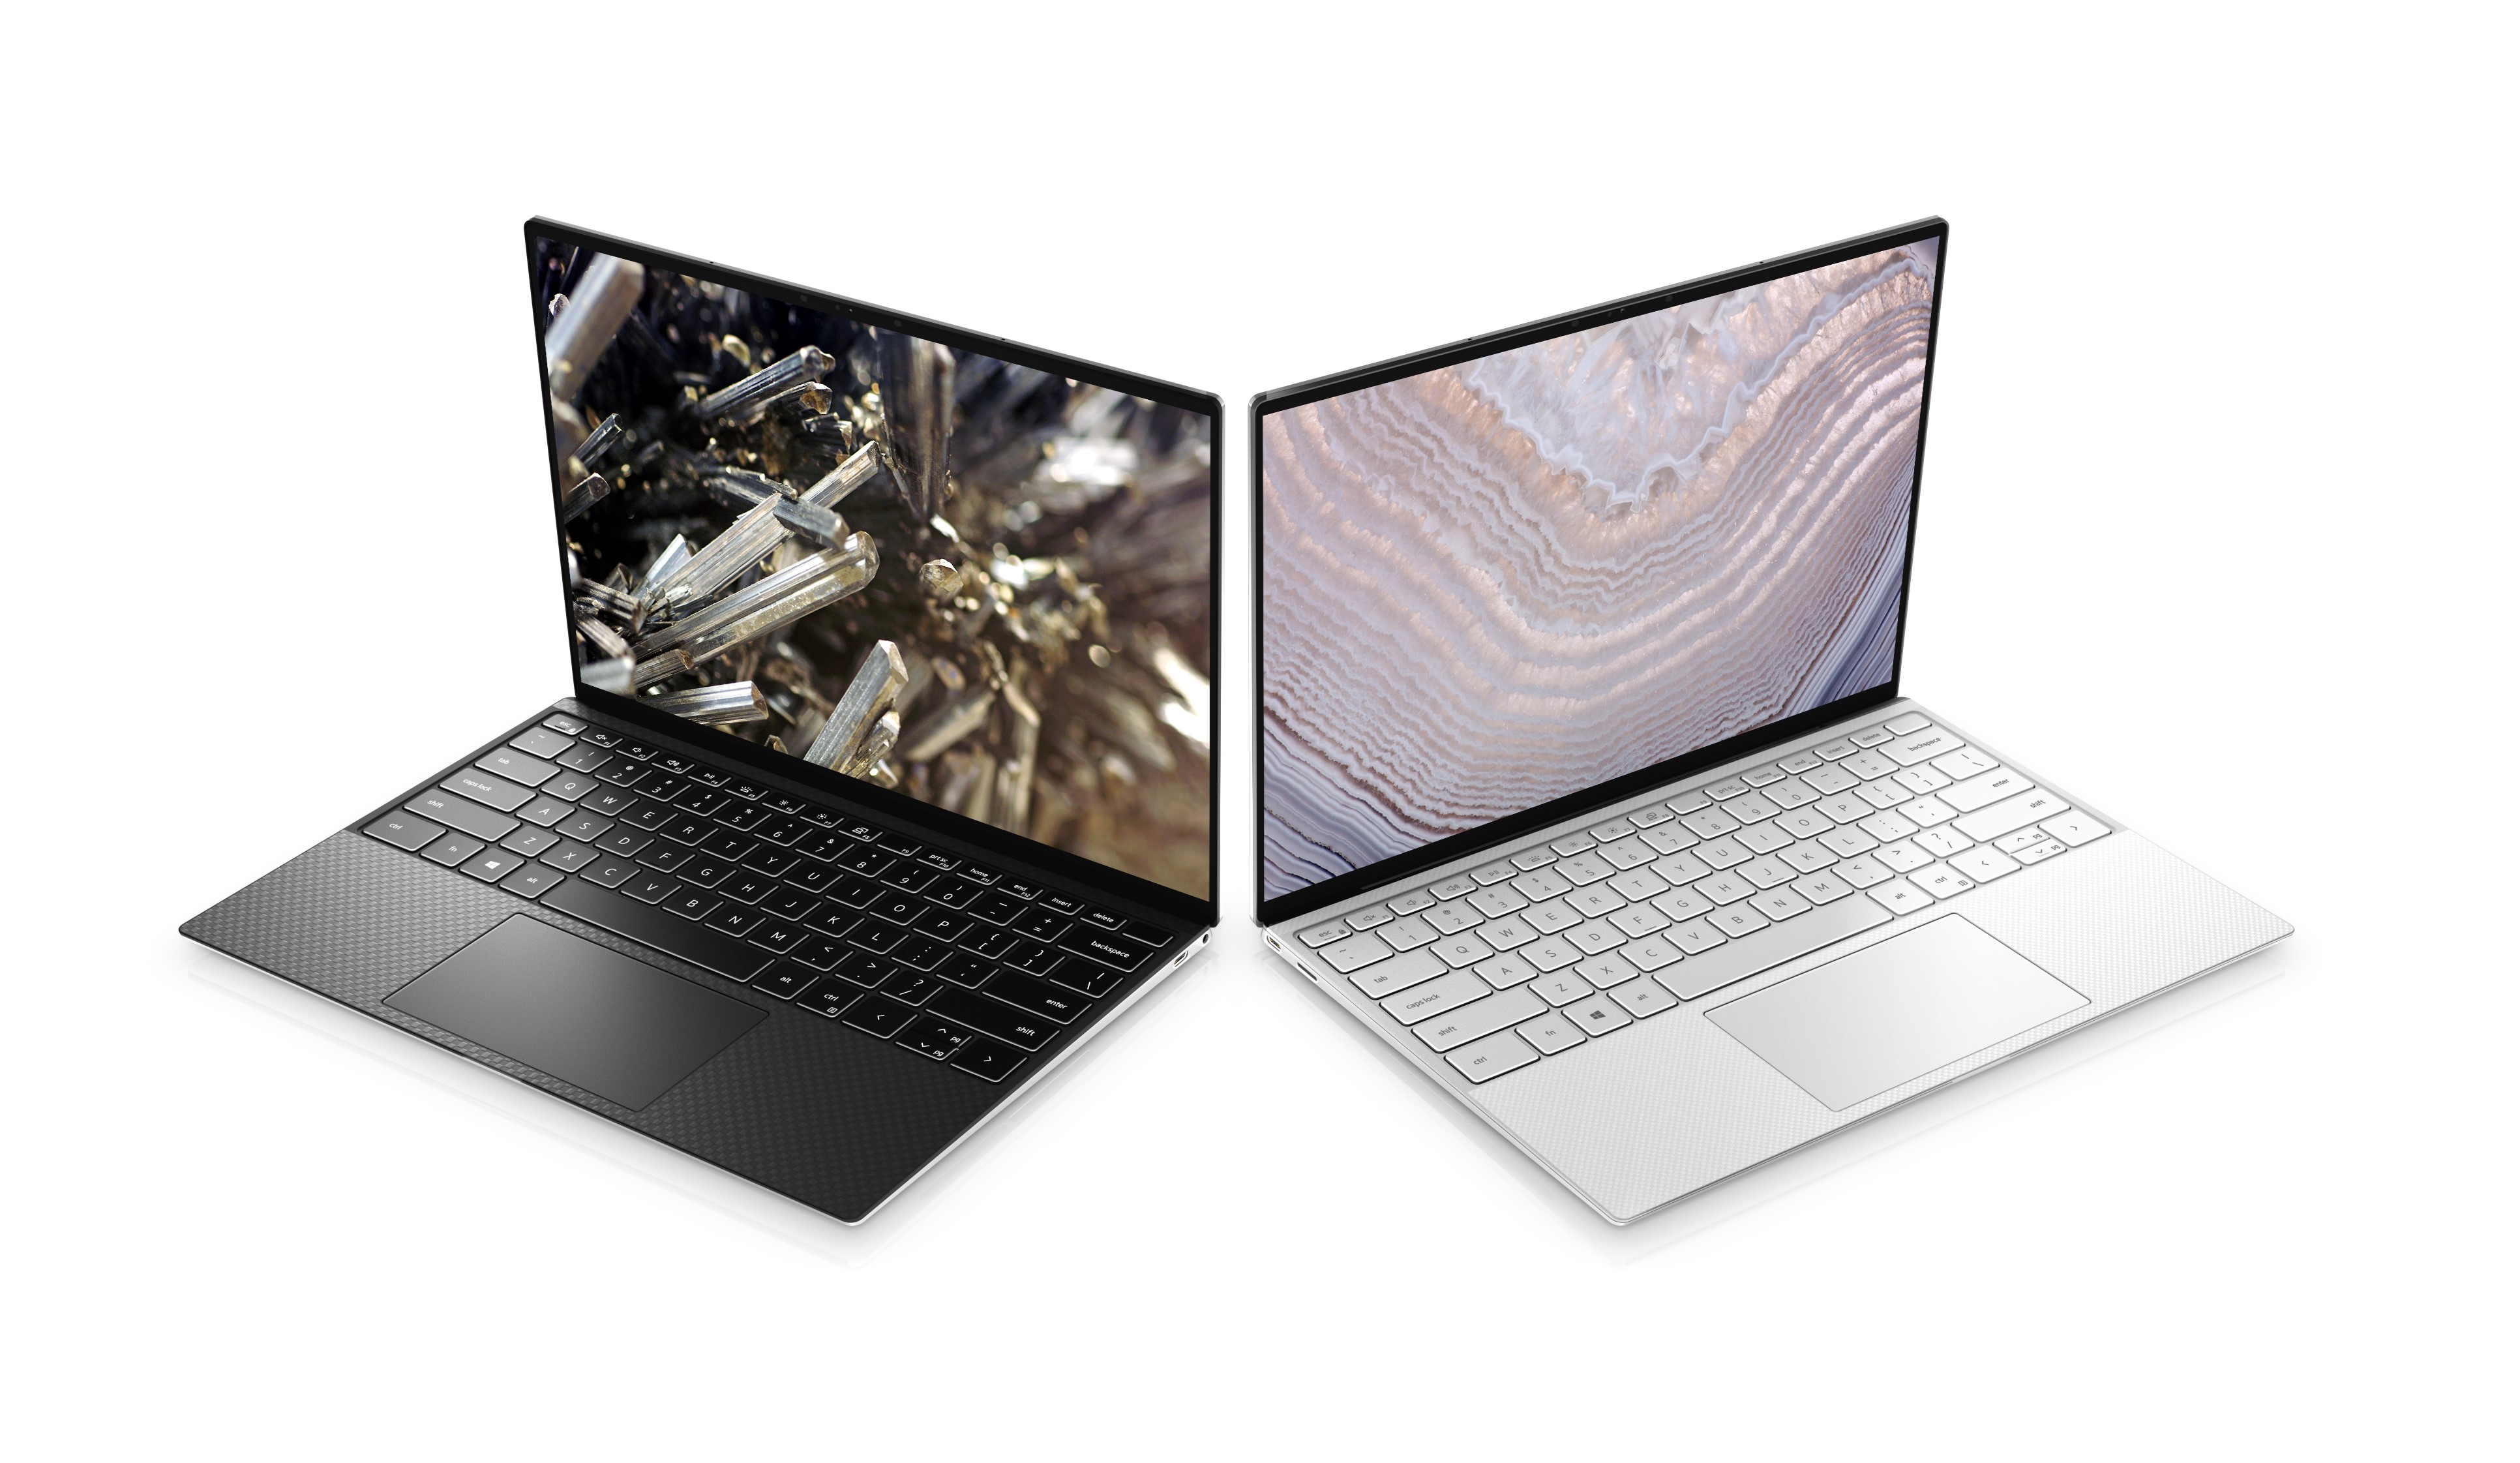 Dell XPS 13 9310 and XPS 13 9310 Developer Edition get customary